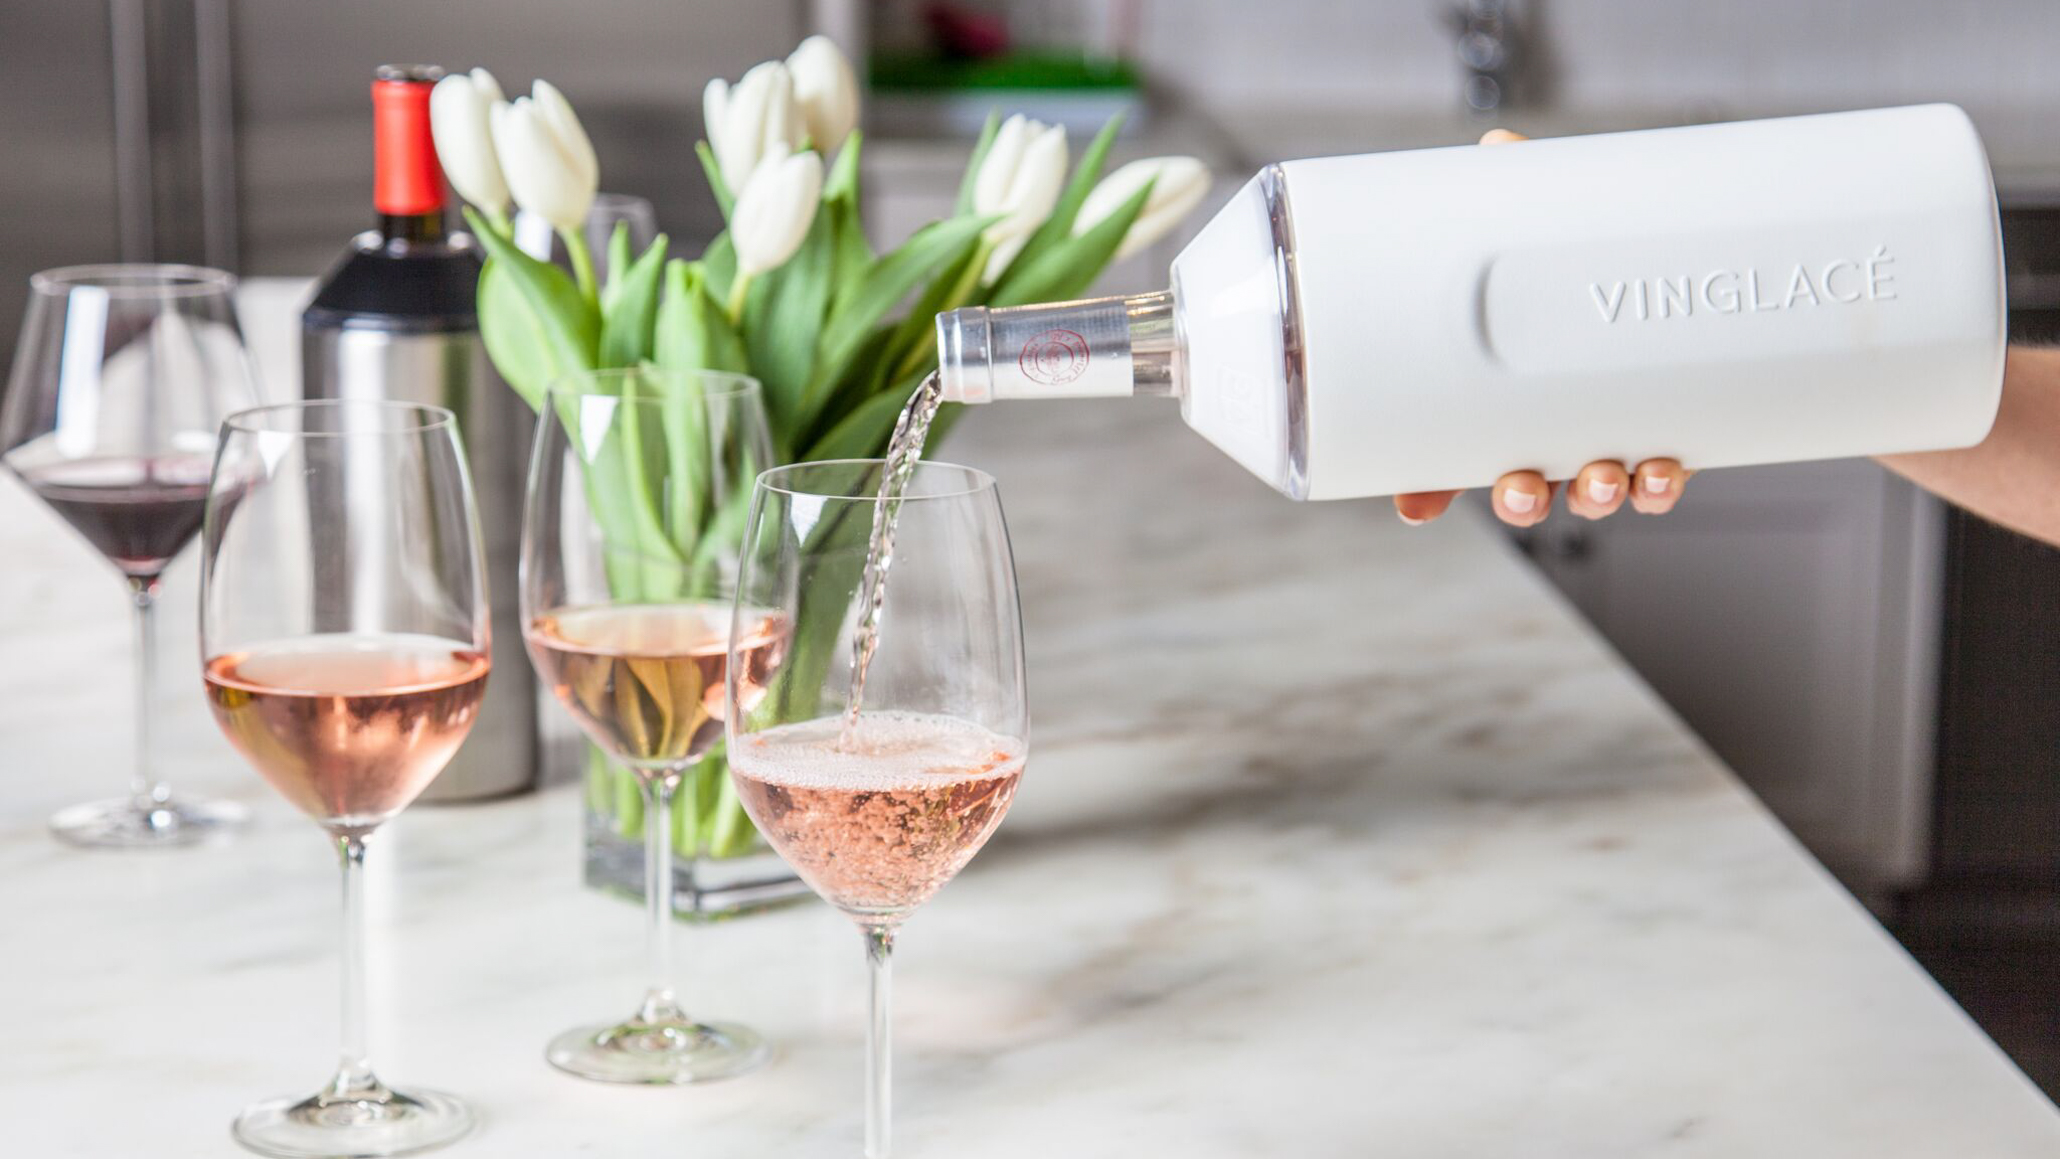 More so than any other beverage, wines deserve to be served at an optimum temperature. In the heat of backyard gatherings, wine temperature control accessories like Vinglace can keep your wine cooled to just the right degree and keep guests smiling. Image: Vinglace.